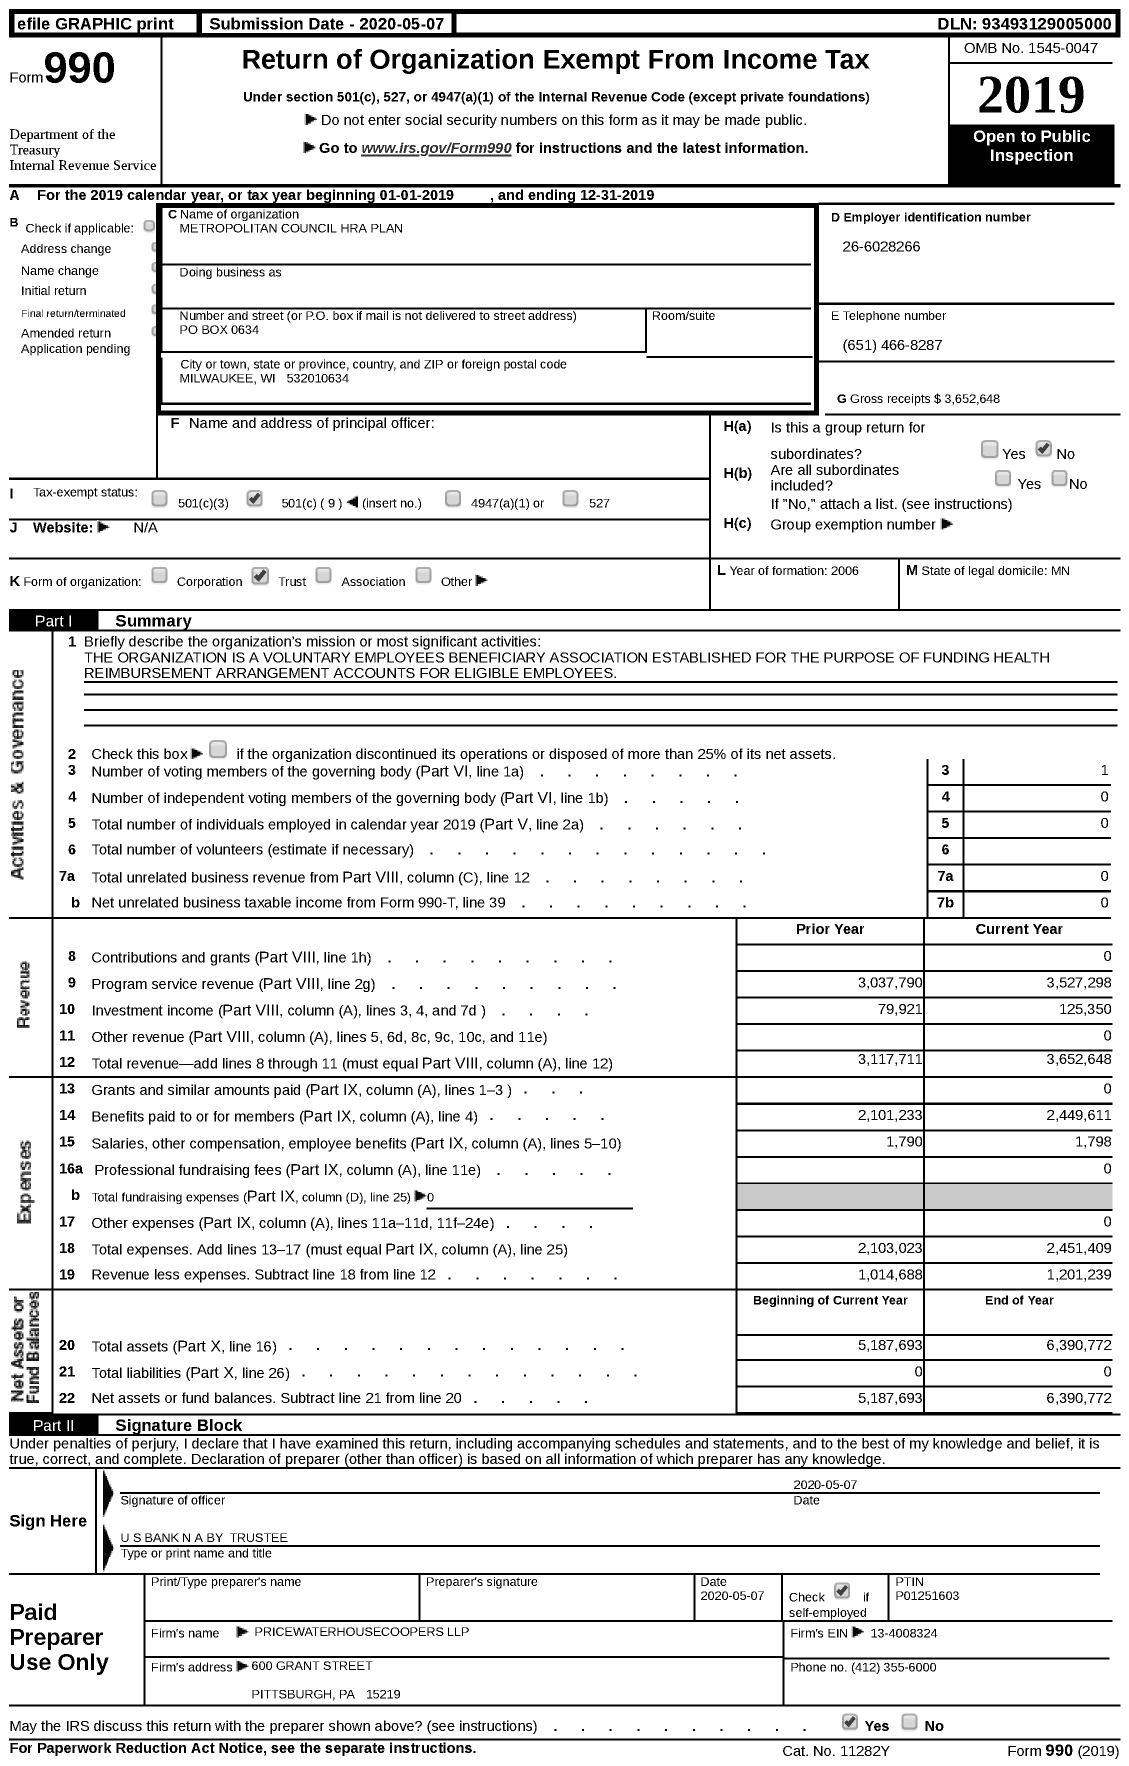 Image of first page of 2019 Form 990 for Metropolitan Council Hra Plan